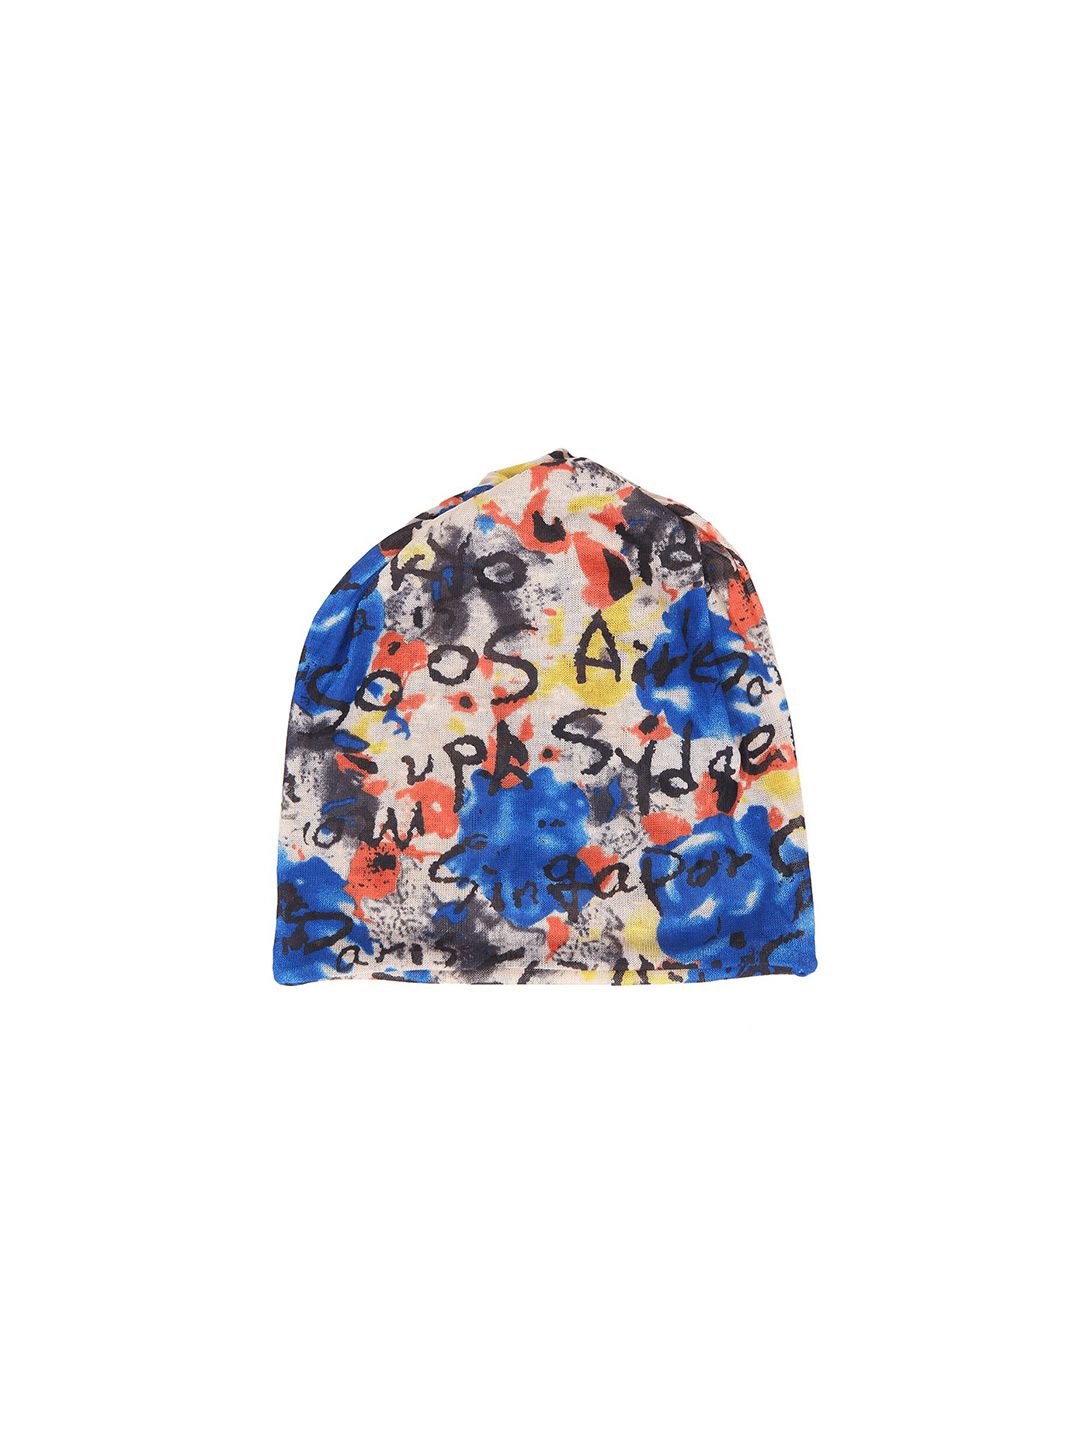 iSWEVEN Unisex Multicoloured Printed Cotton Beanie Price in India